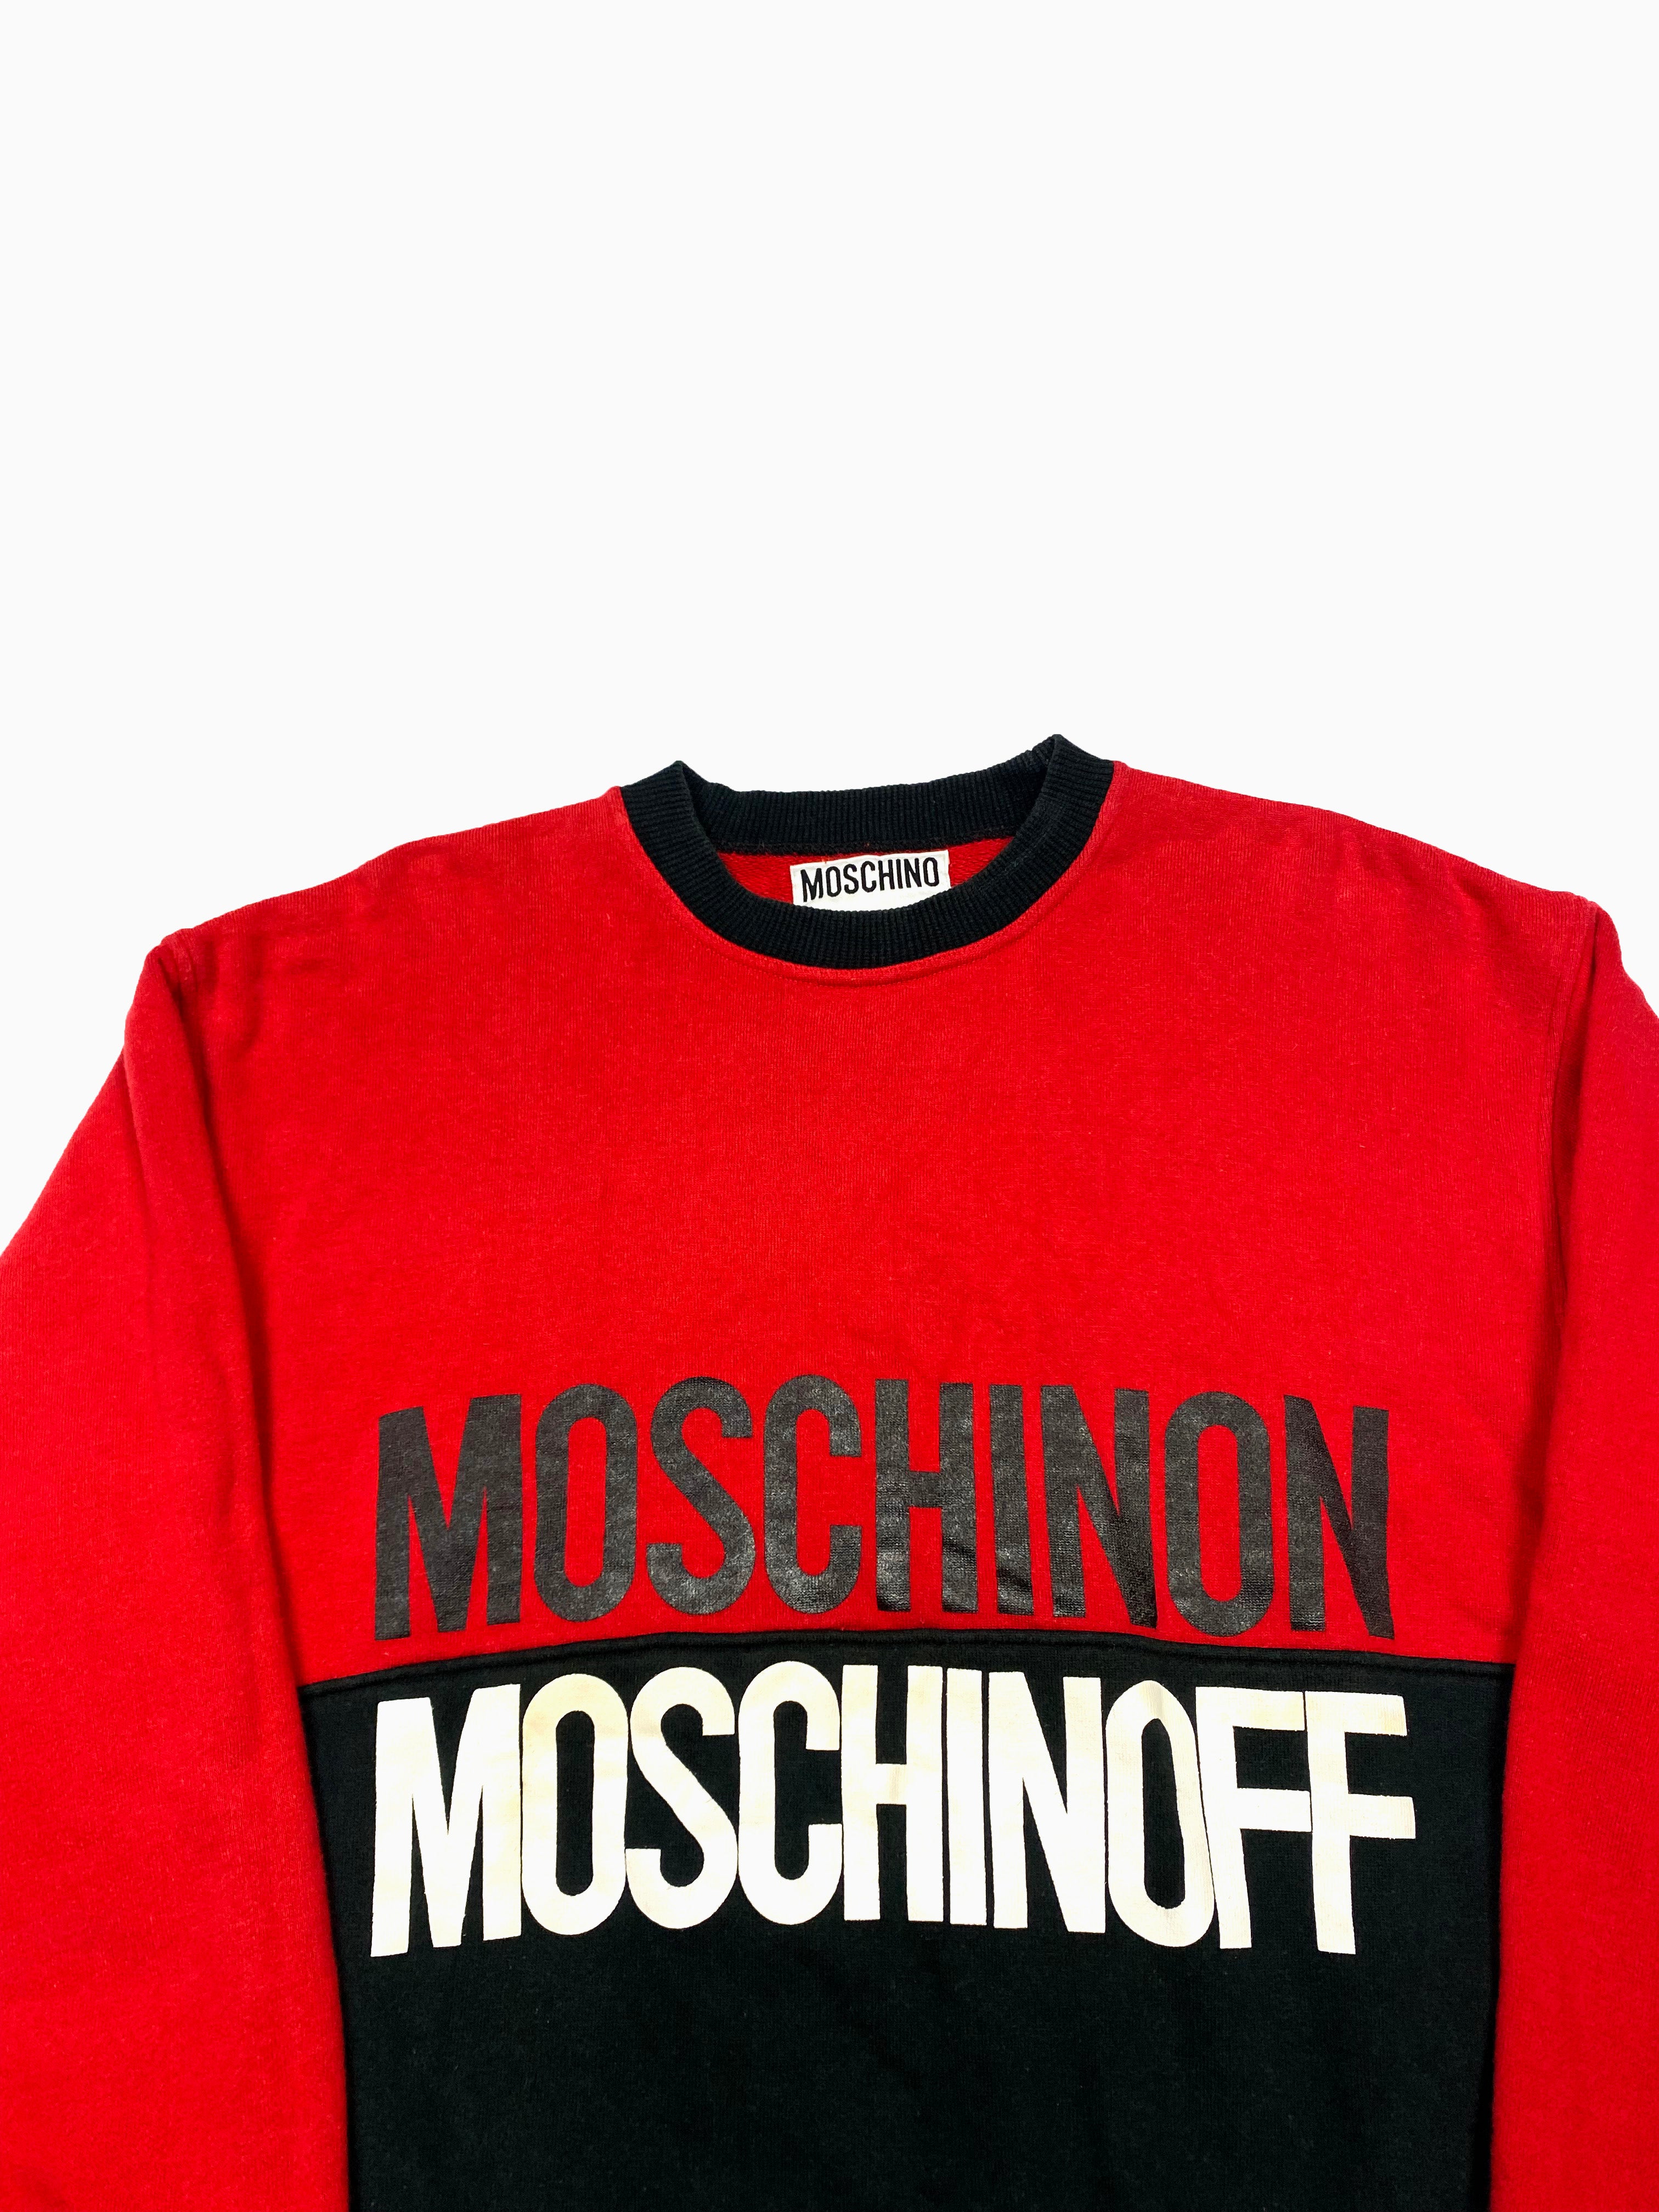 Moschino On/Off Jumper 90's